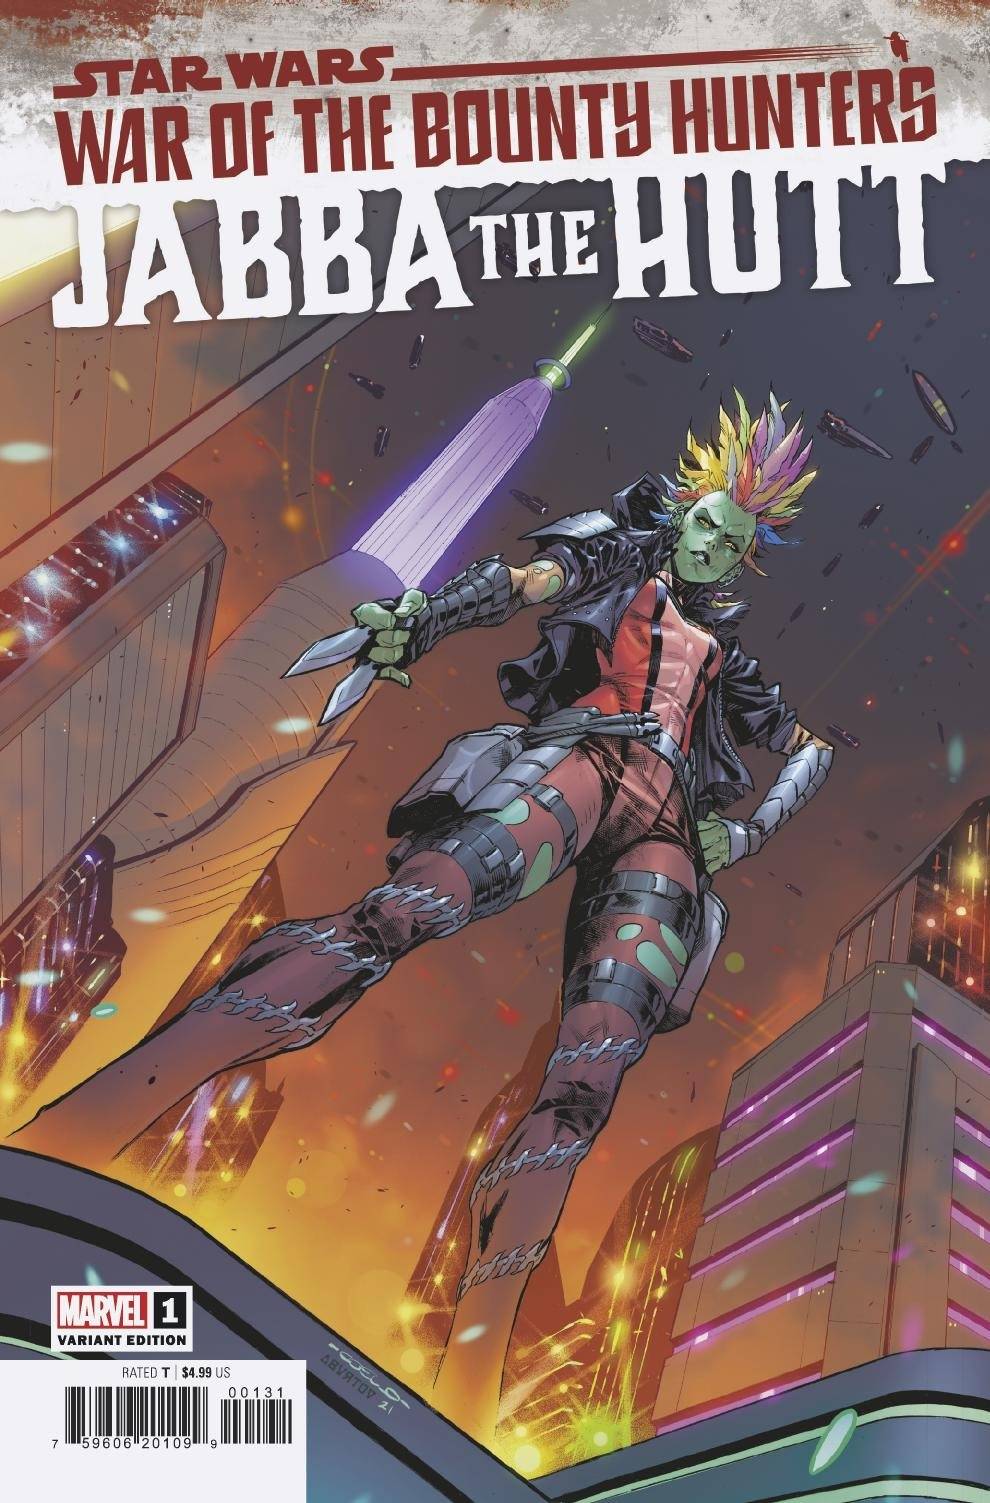 War of the Bounty Hunters: Jabba the Hutt #1 (Iban Coello Variant Cover) (21.07.2021)